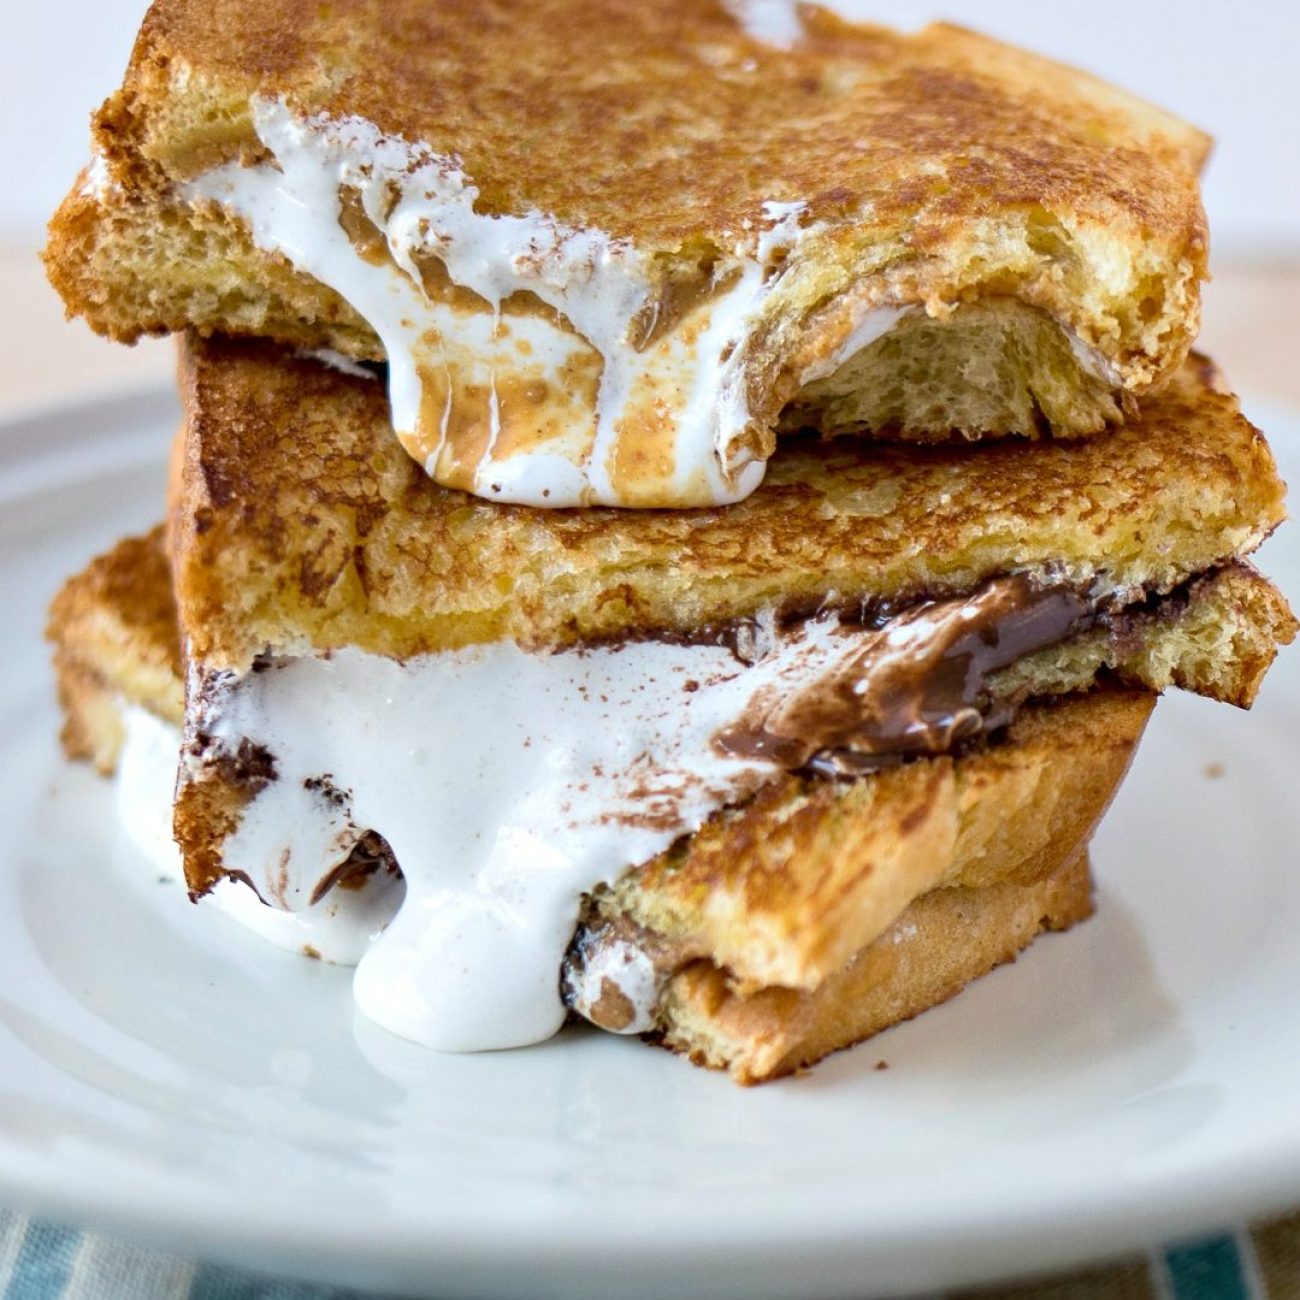 Grilled Chocolate And Peanut Butter